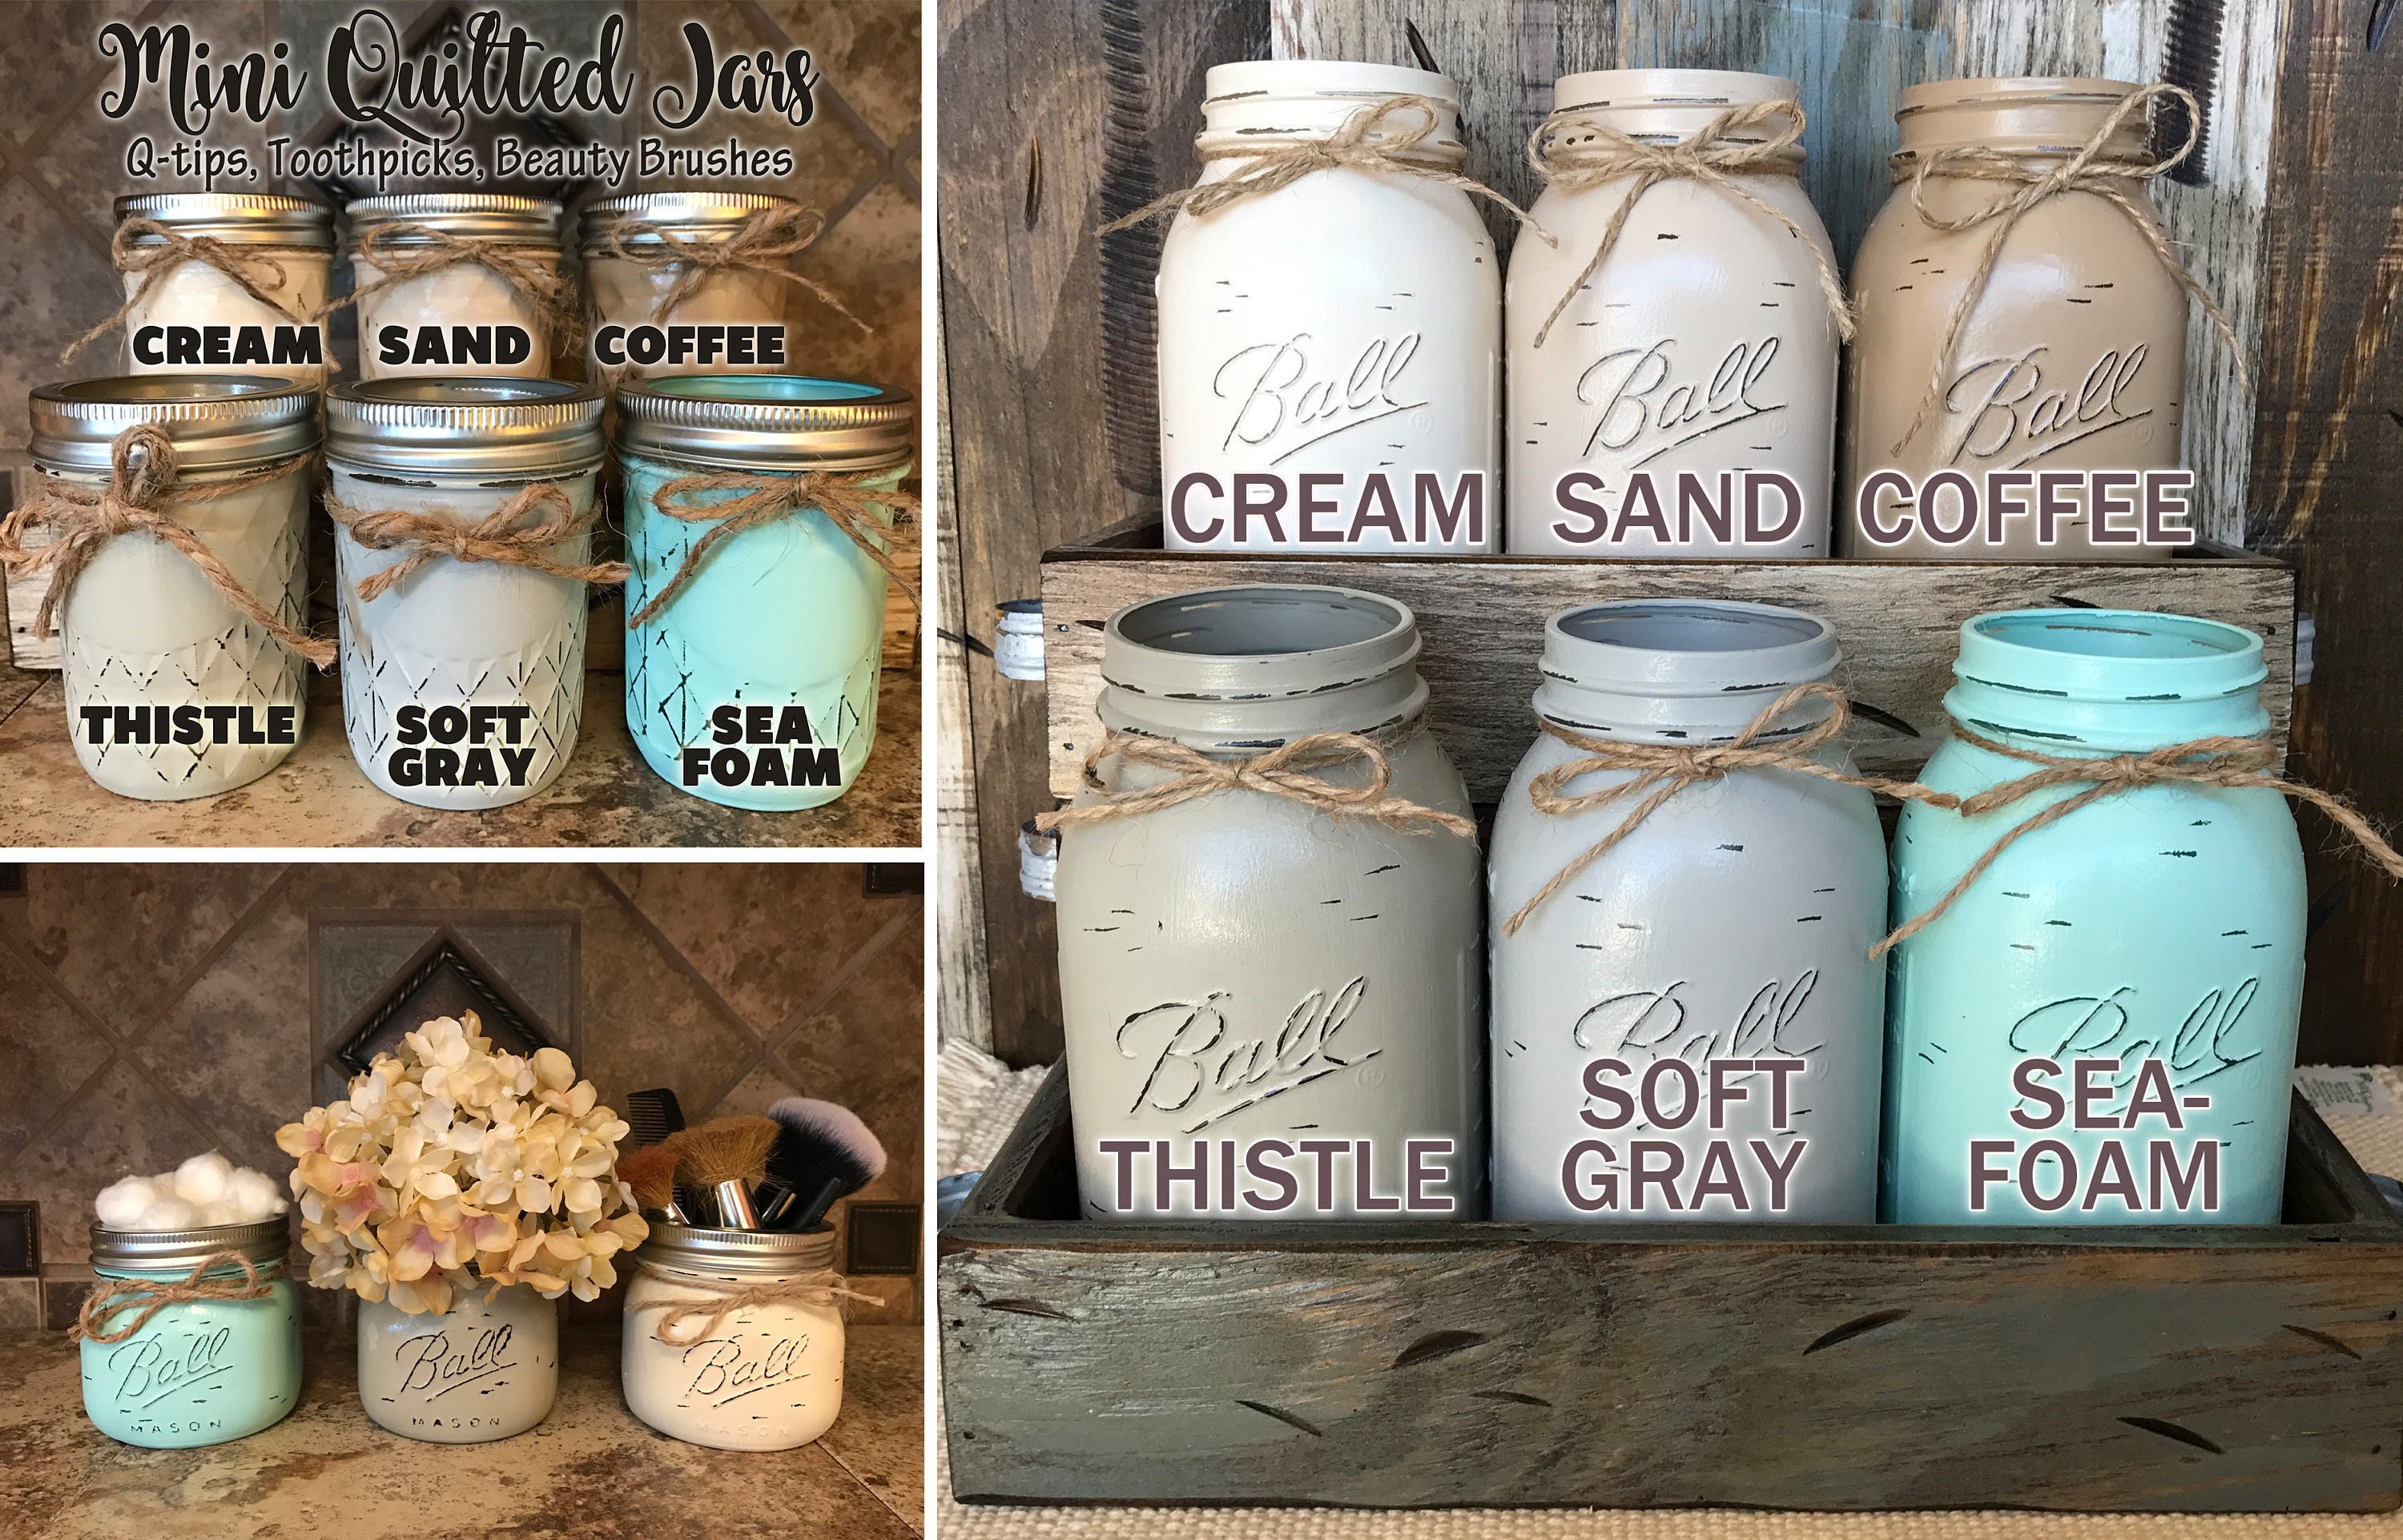 Mason Jar Bathroom Decor Set in White Wooden Tray Choose Your Jar and Flower Colors to Match Your Decor. Set of 5 Mason Jars With Soap Pump in Rustic Tray For Vanity Organization 